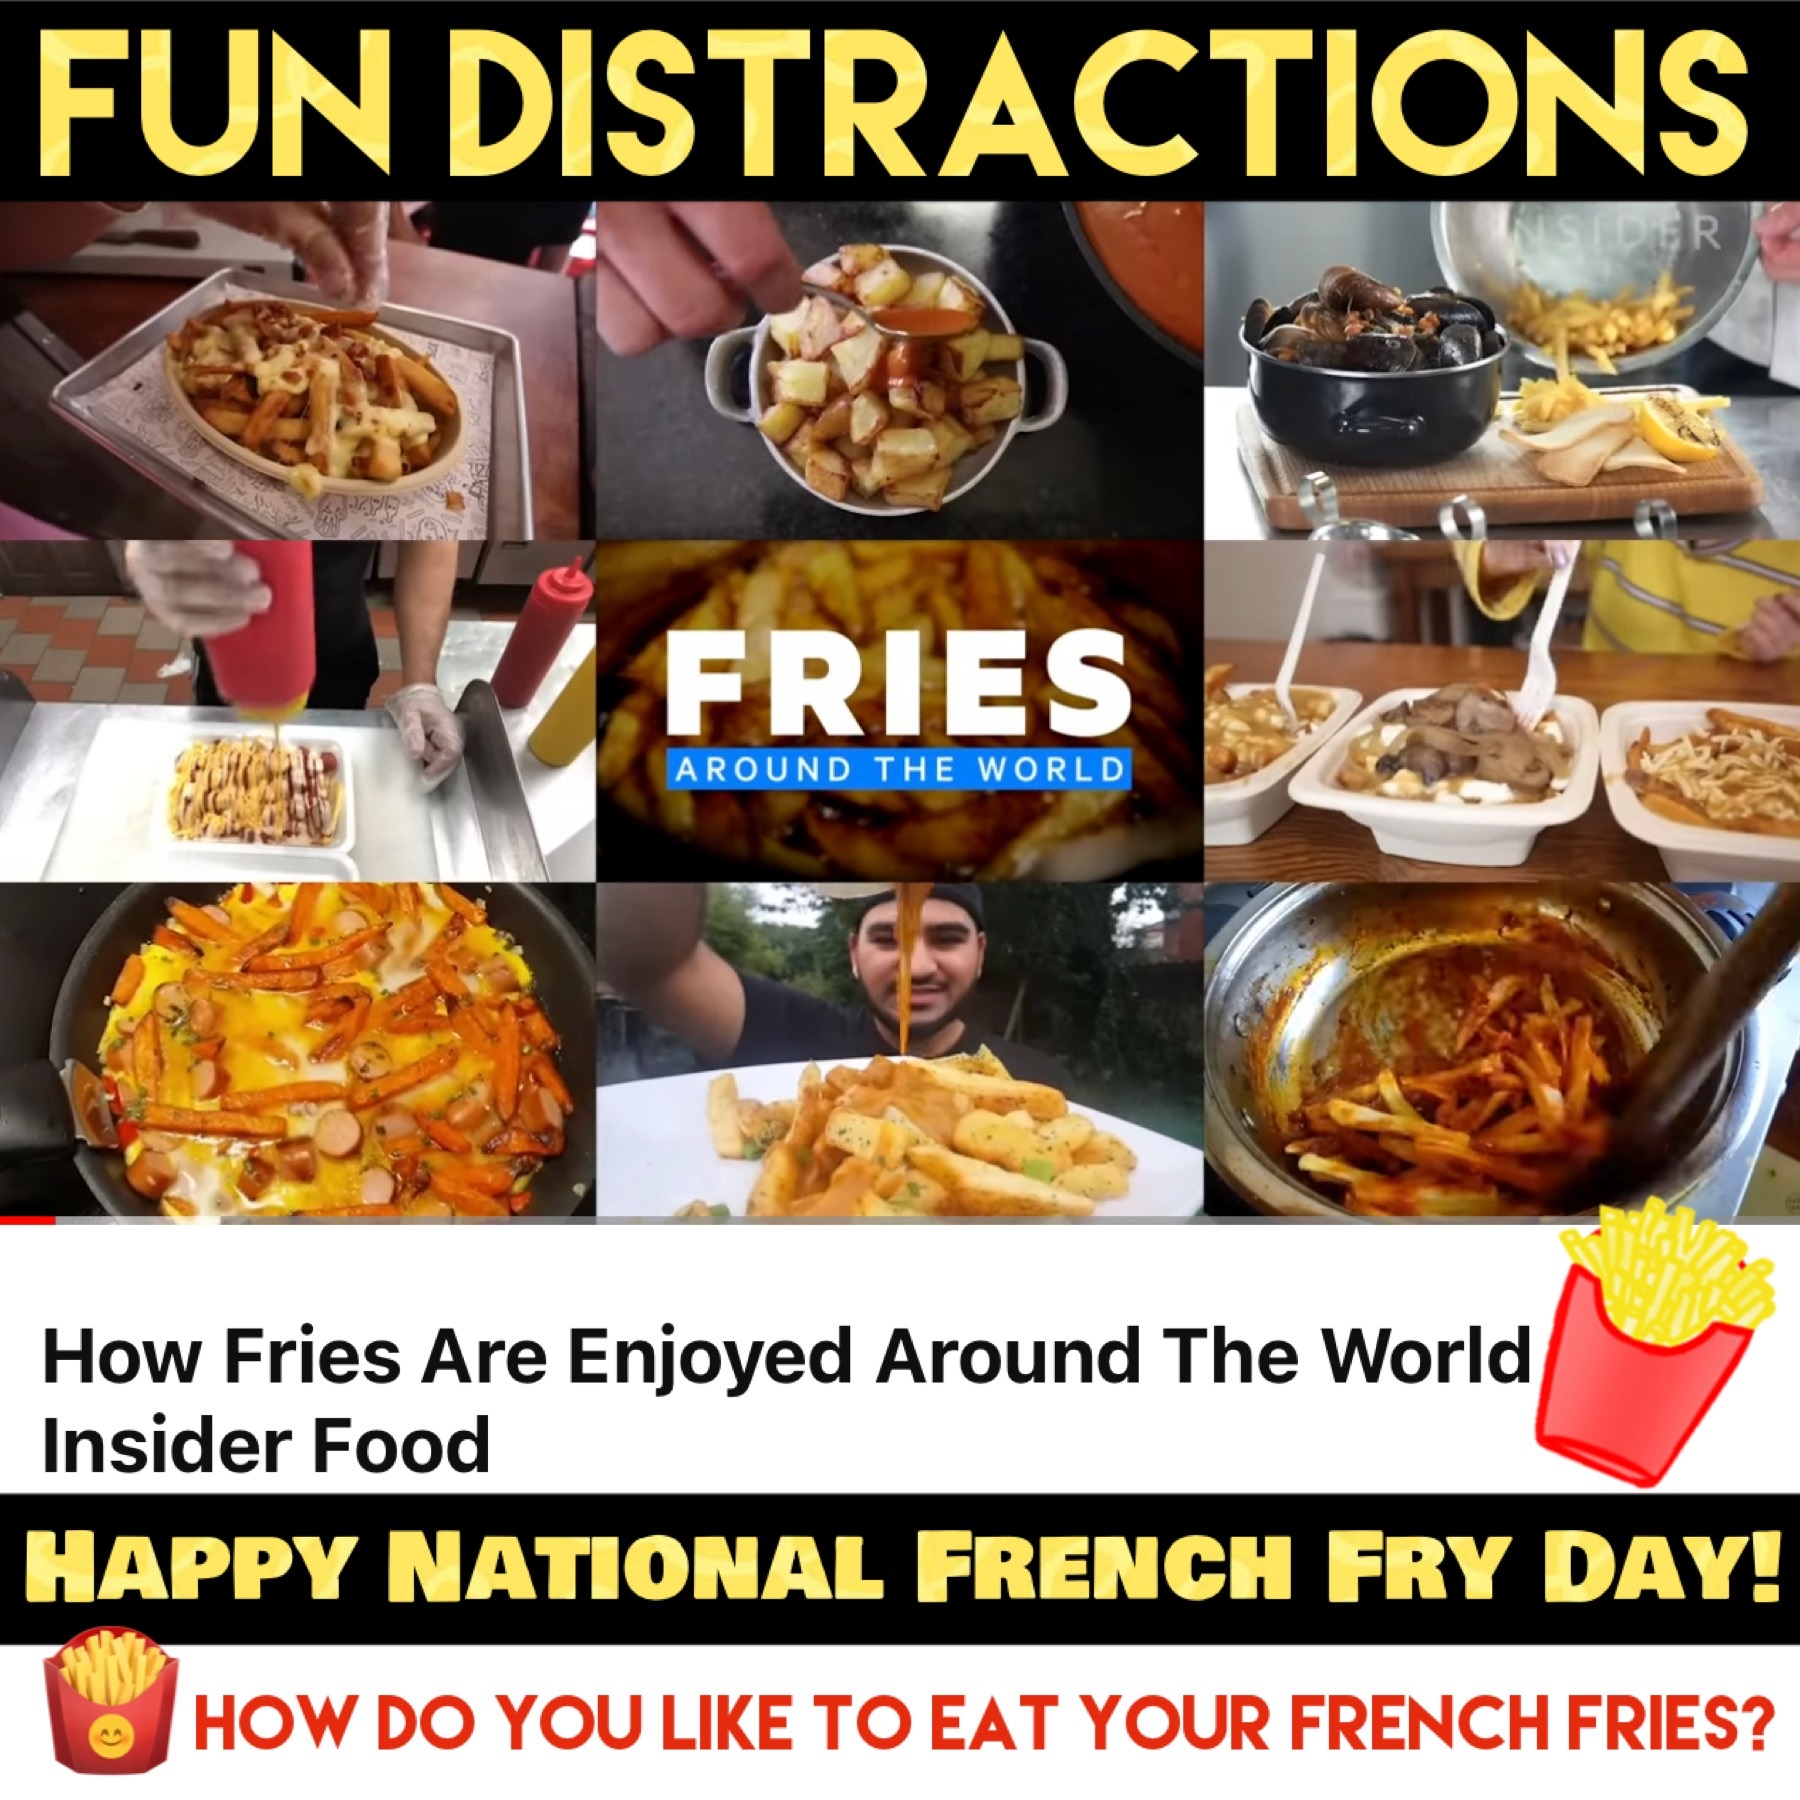 Several images of a variety of french fries